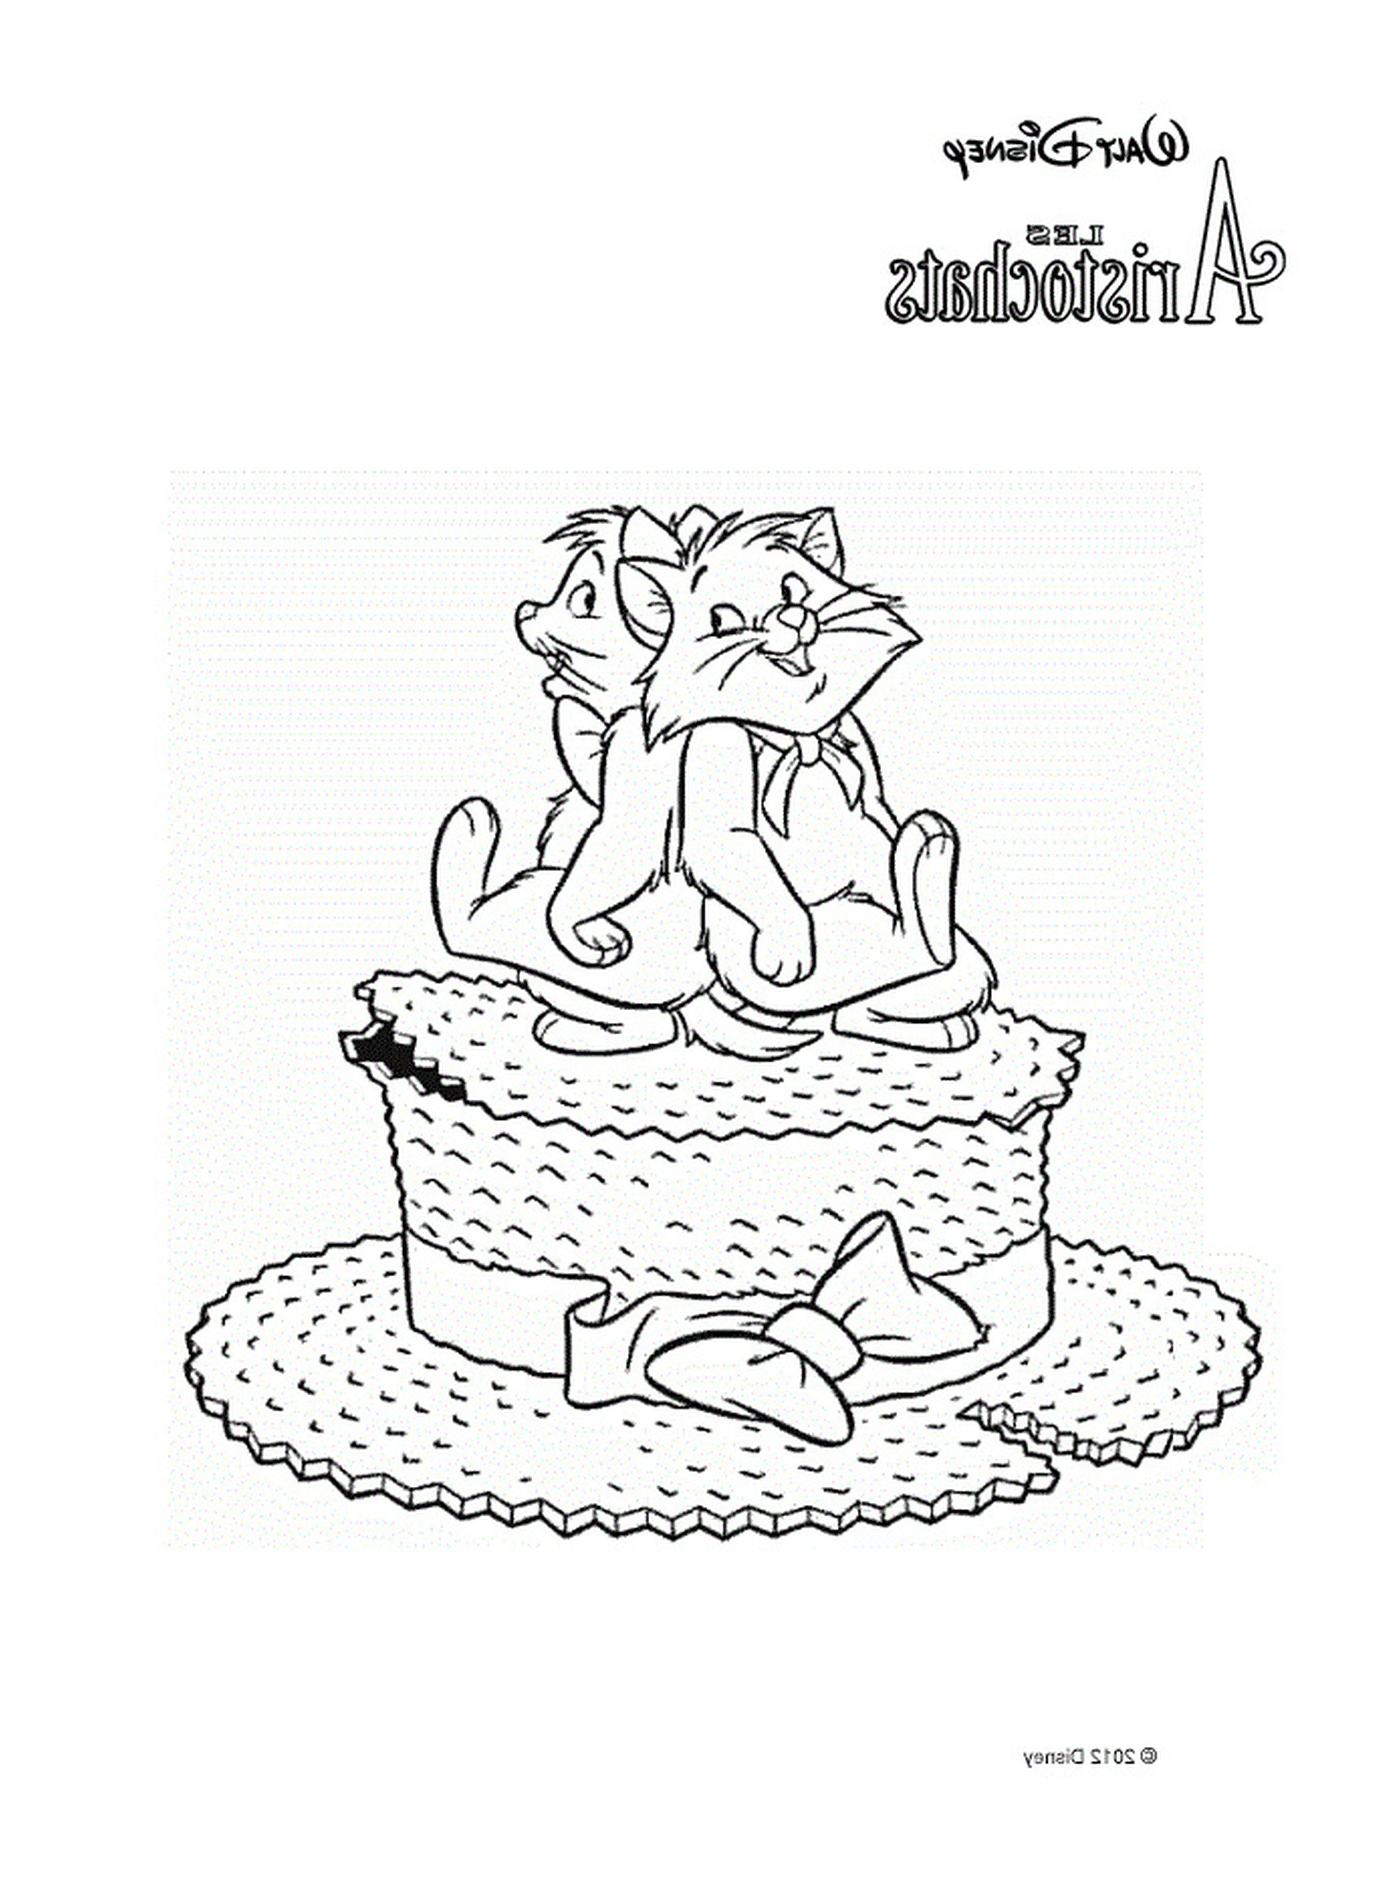  Two cats sitting on a big cake 